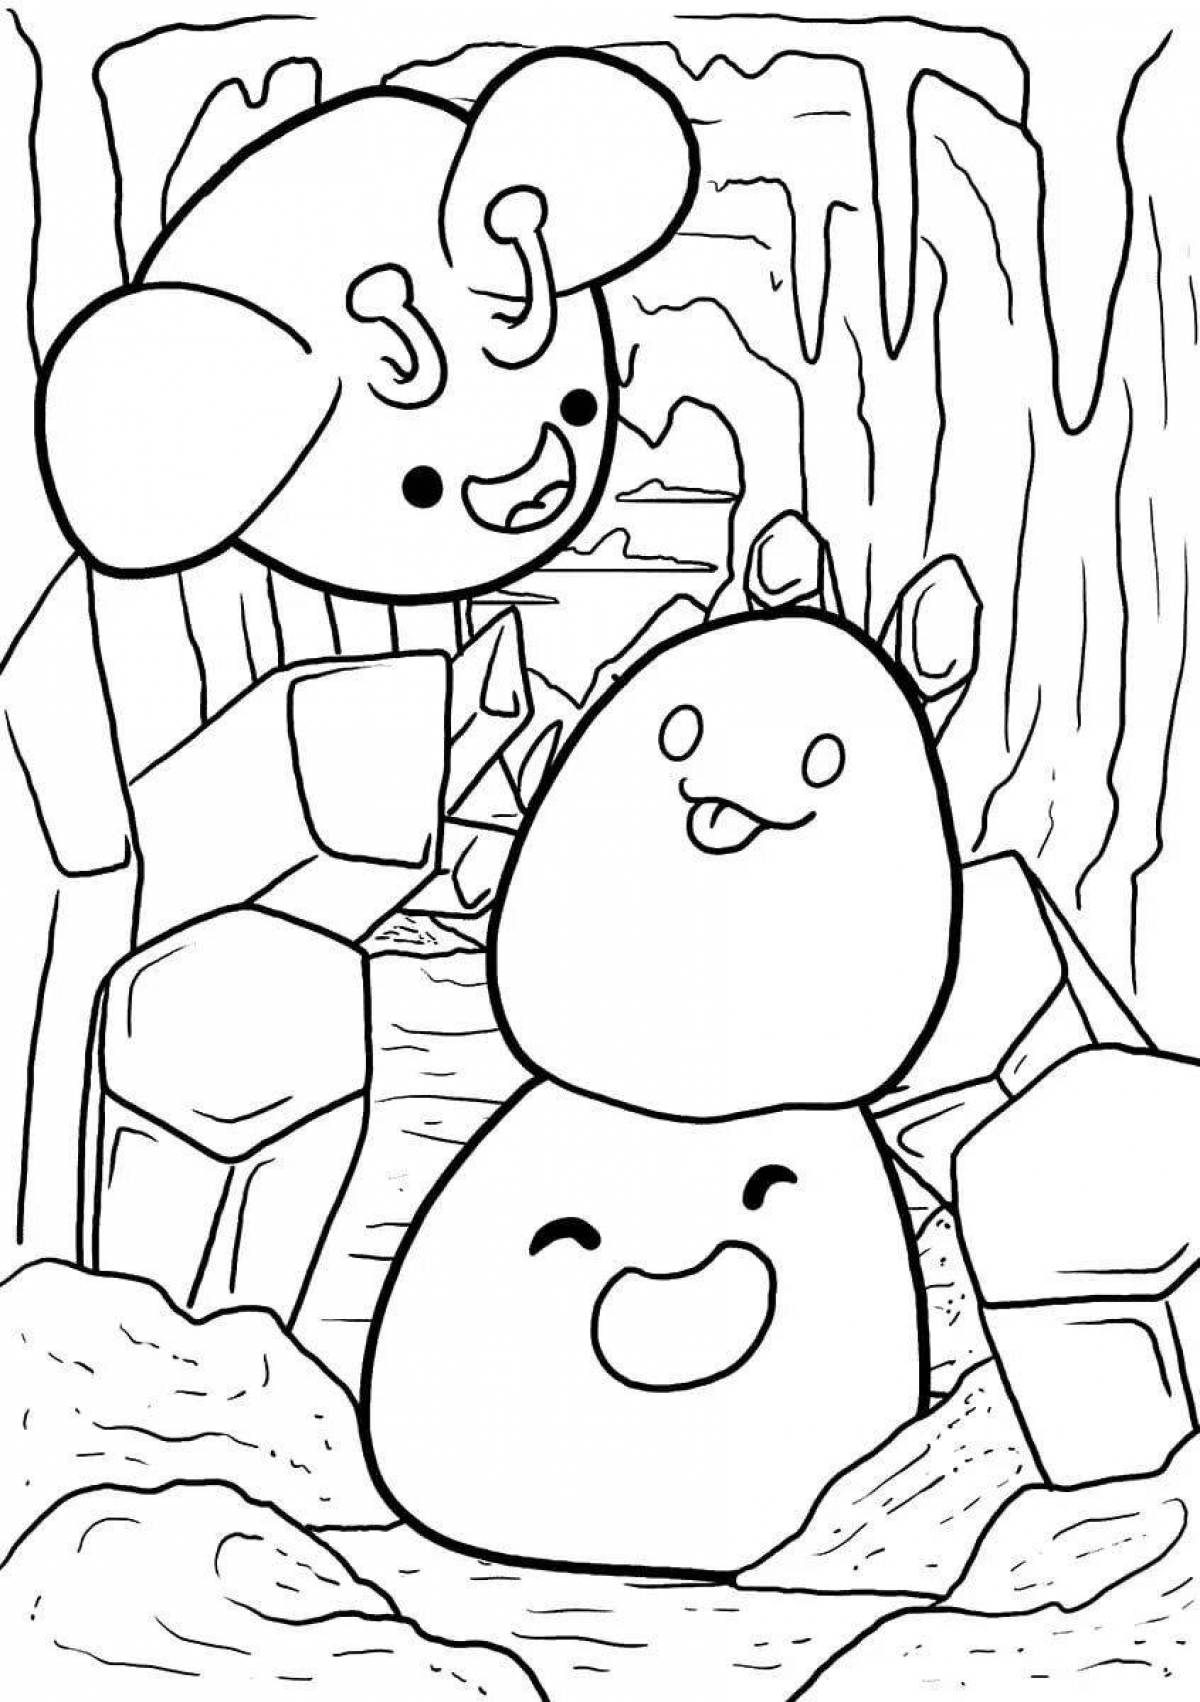 Color-lively slime coloring page for kids